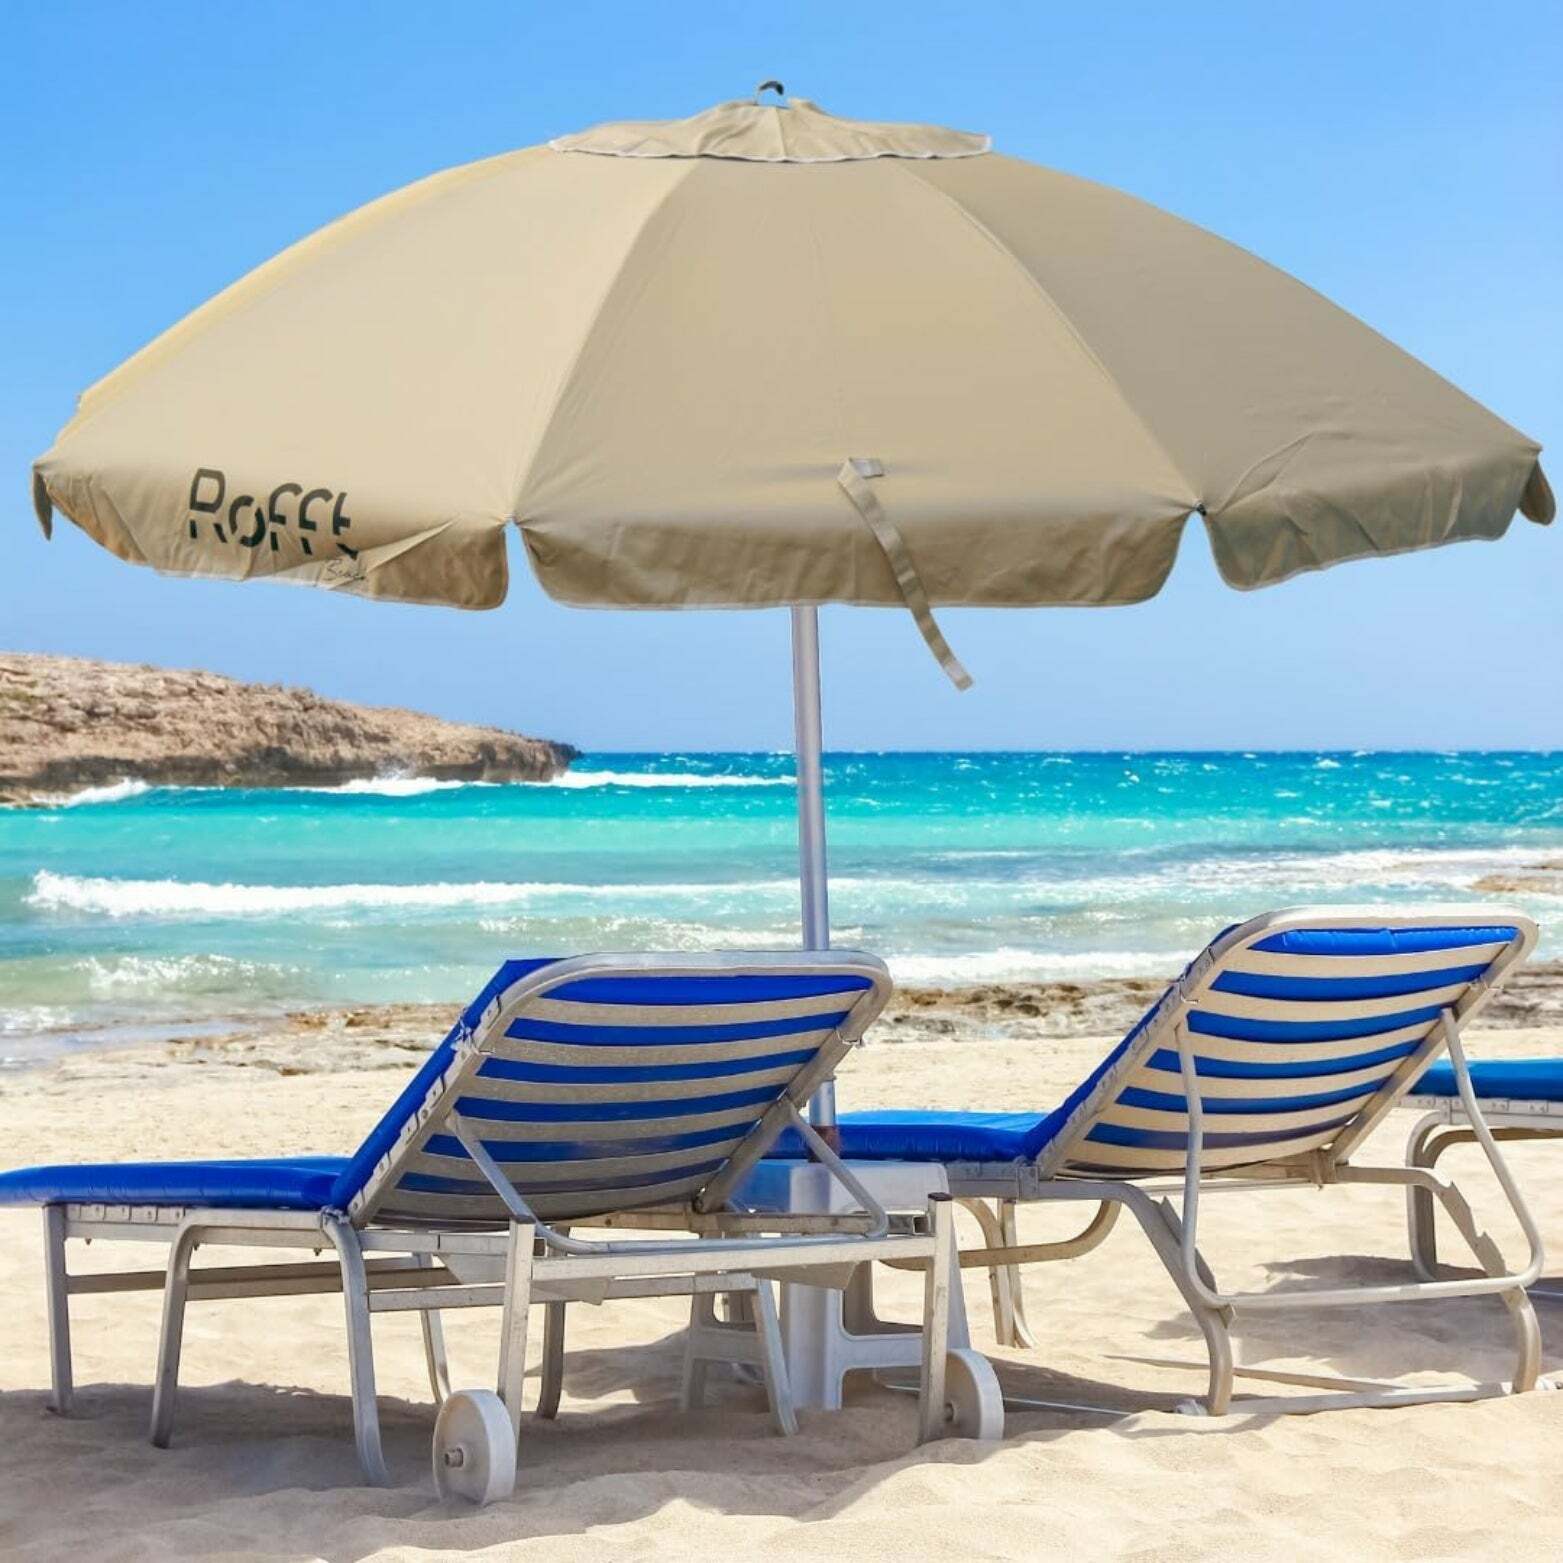 ROFFT Sturdy Beach Umbrella with UV Protection and Windproof Design - 7.8 Ft Coverage, Steel & Aluminum Pole, Tilt Adjustment - Beige